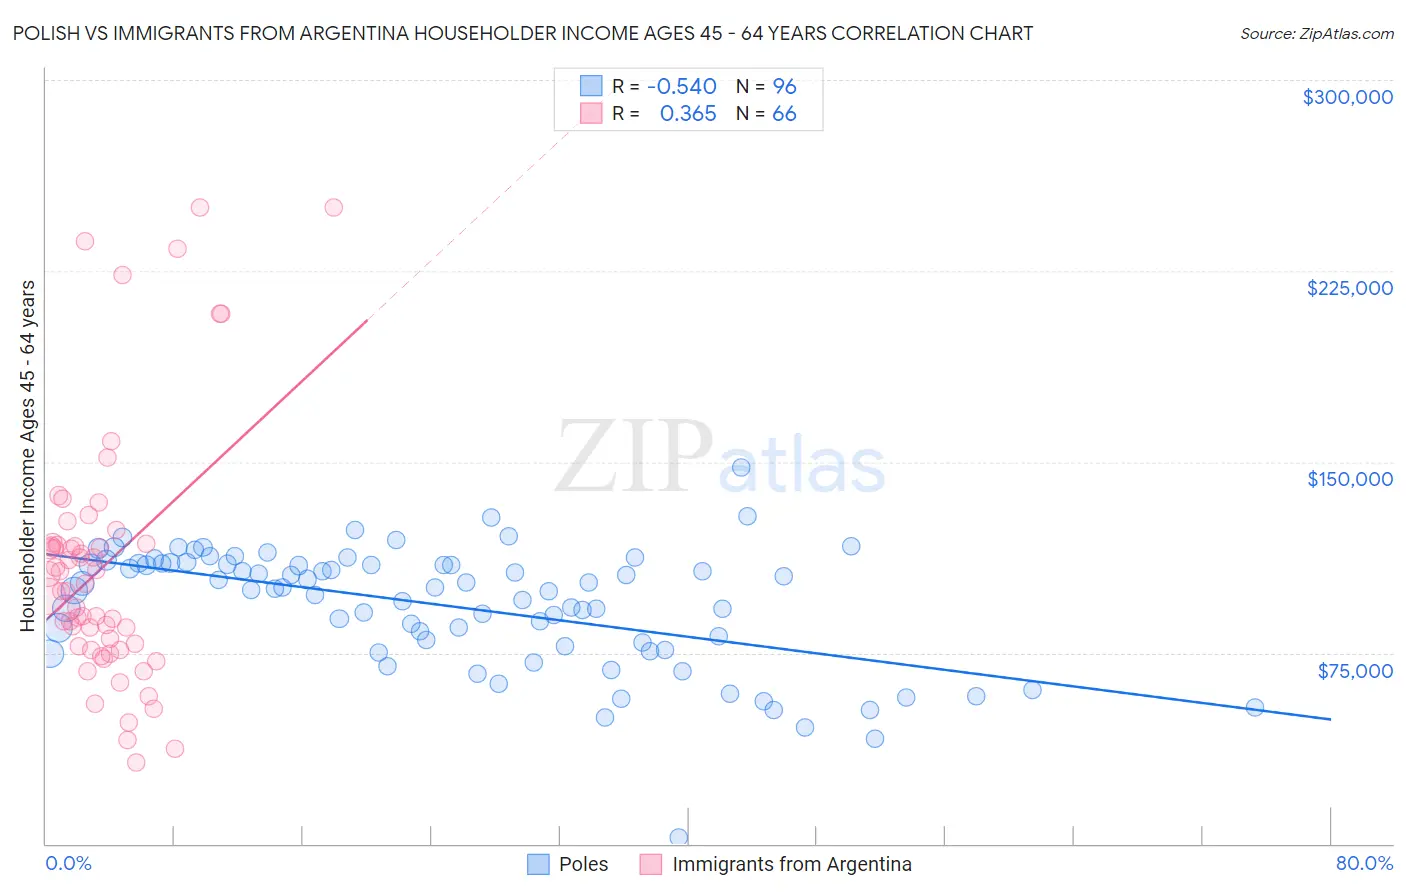 Polish vs Immigrants from Argentina Householder Income Ages 45 - 64 years